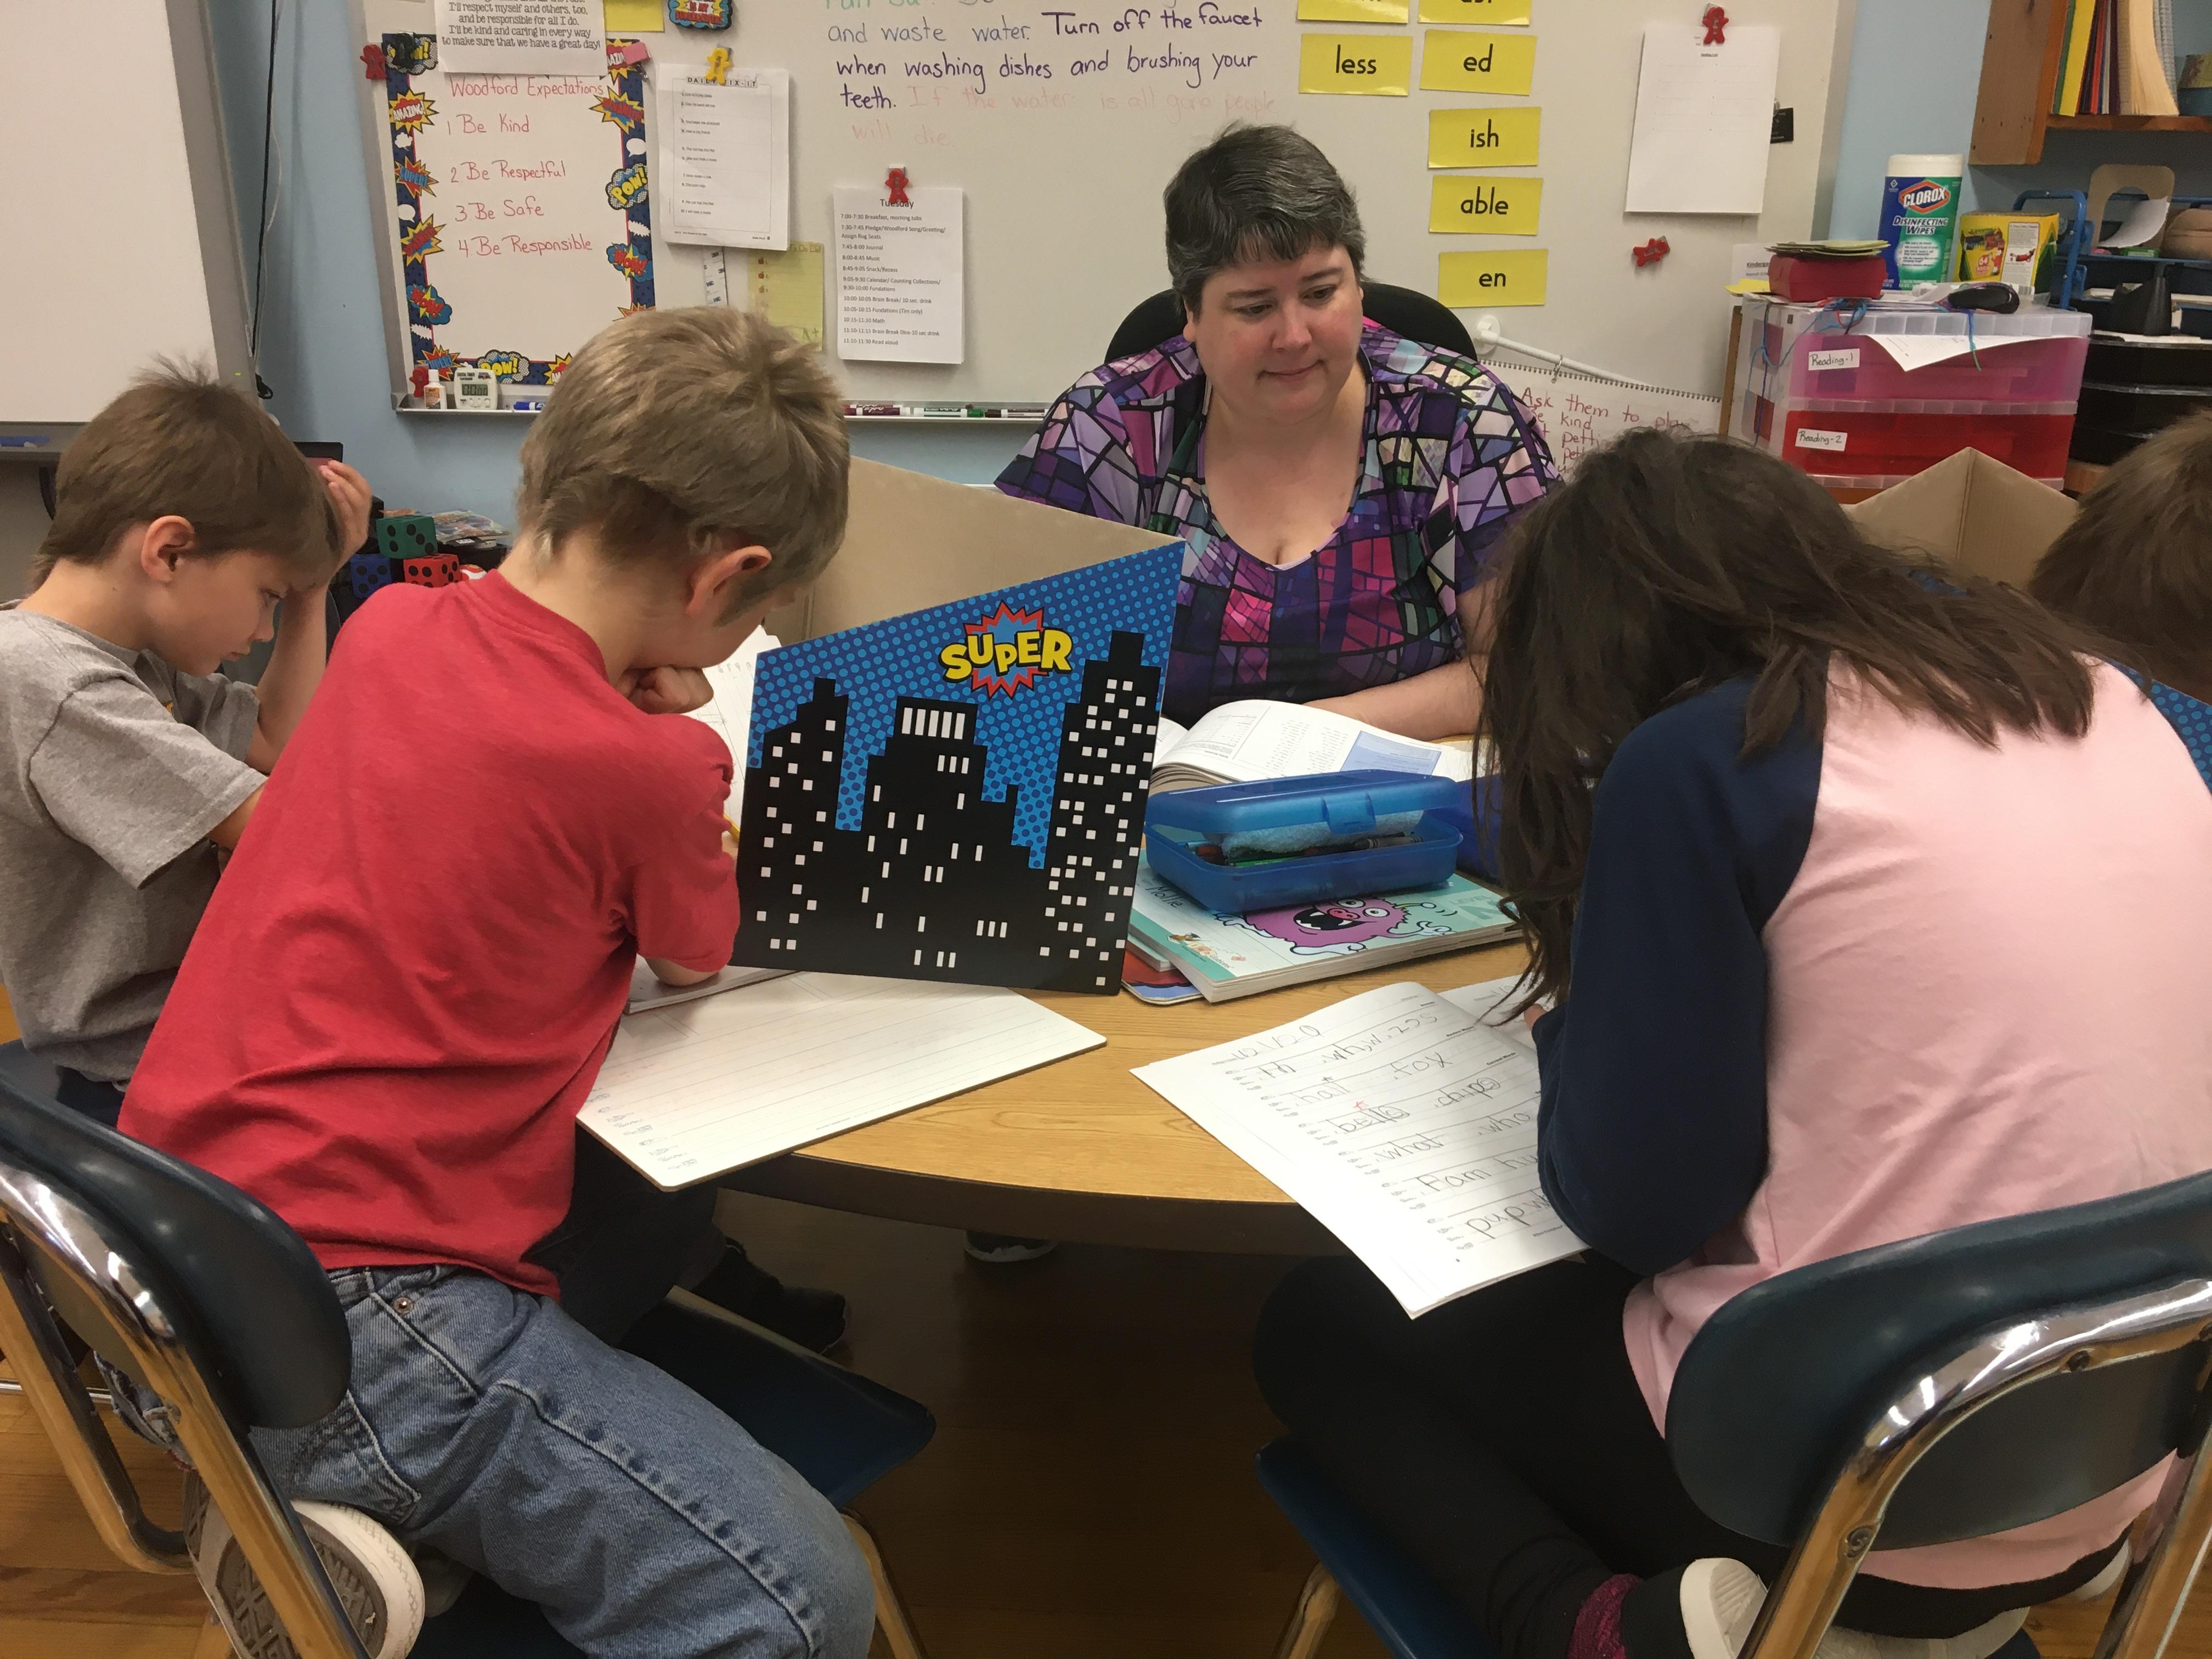 Ms. Chancey's classroom celebrated National Handwriting Day today! To celebrate, students practiced "fundations" with Ms. Chancy while Ms. Jones worked on sight words with another group of kids.